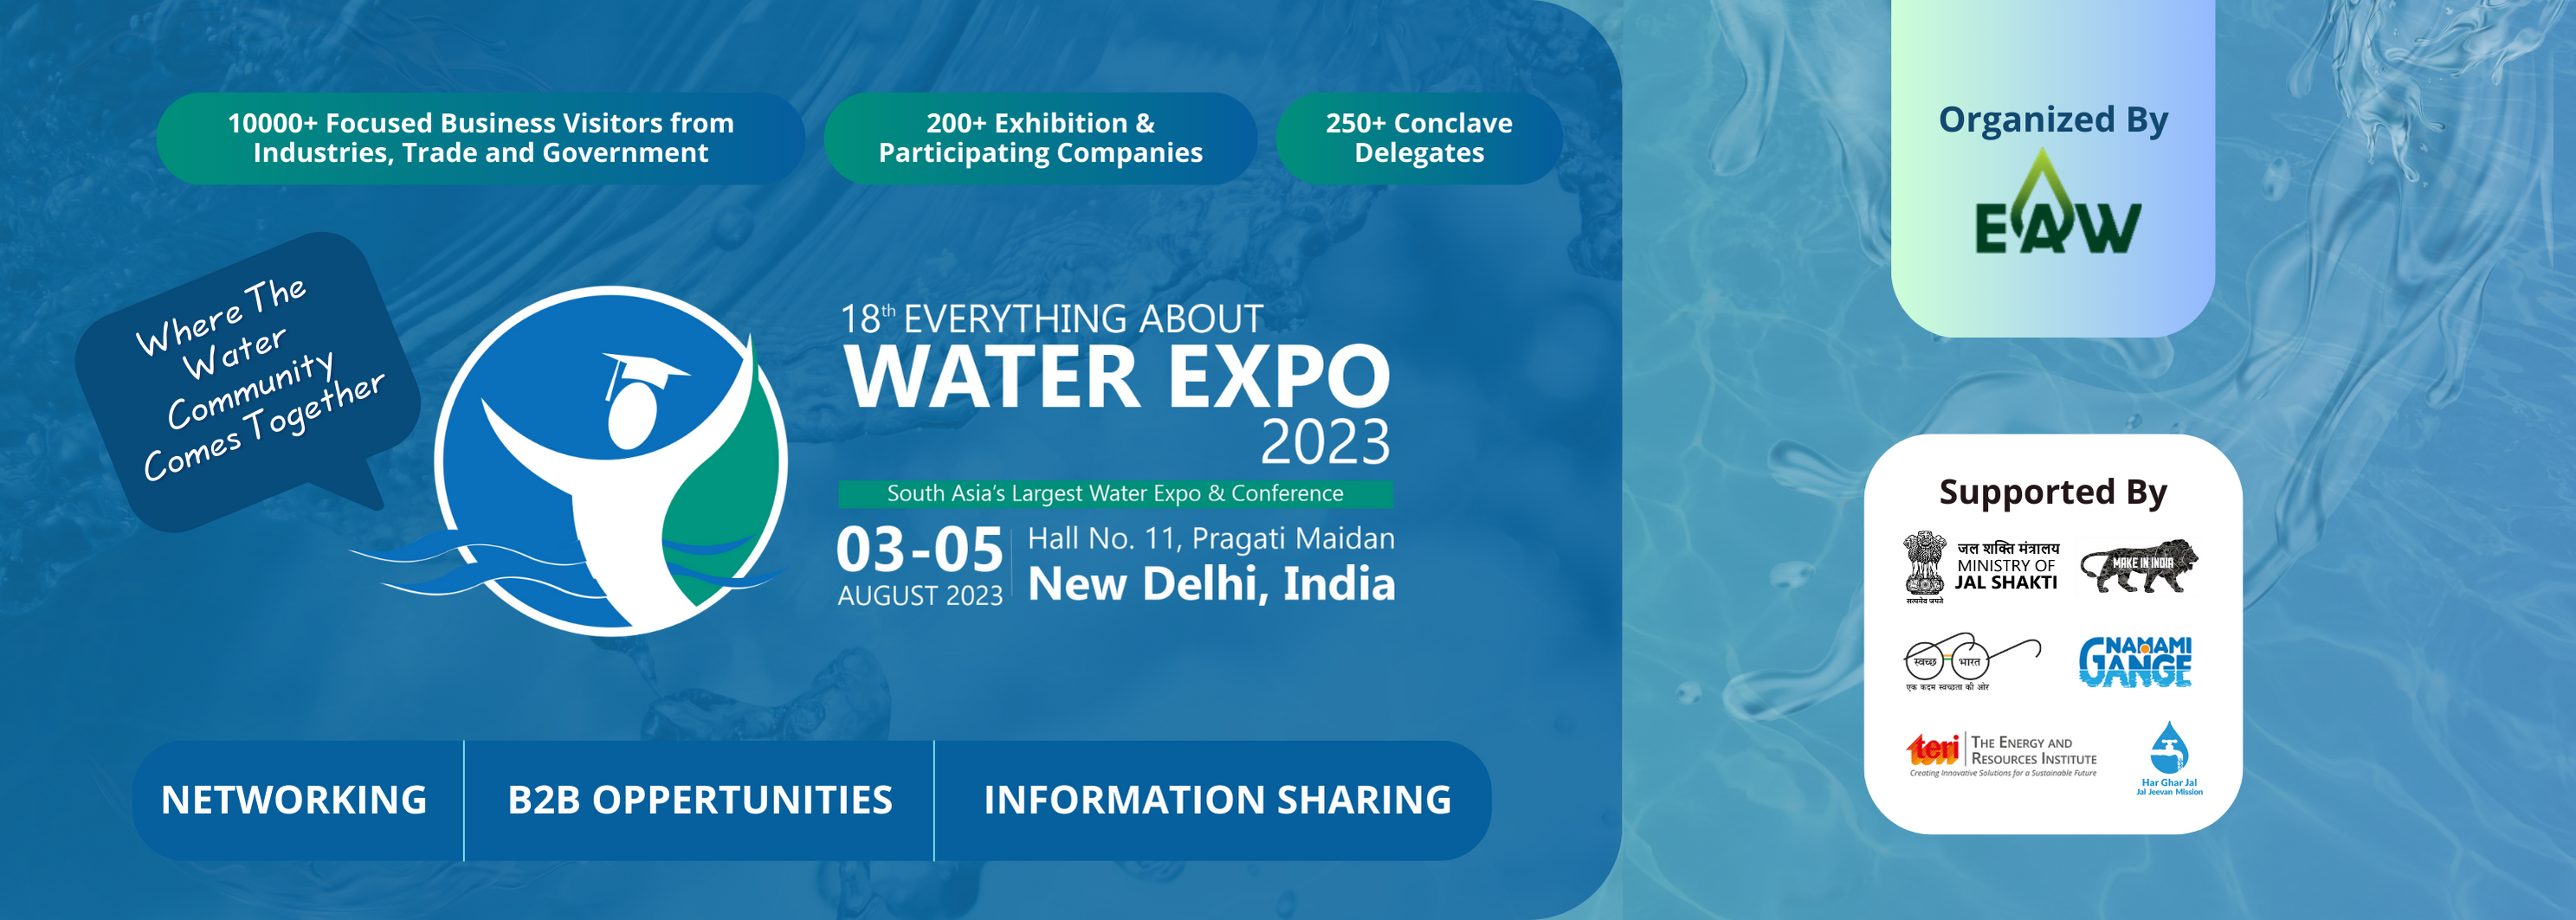 Everything About Water Expo 2023 